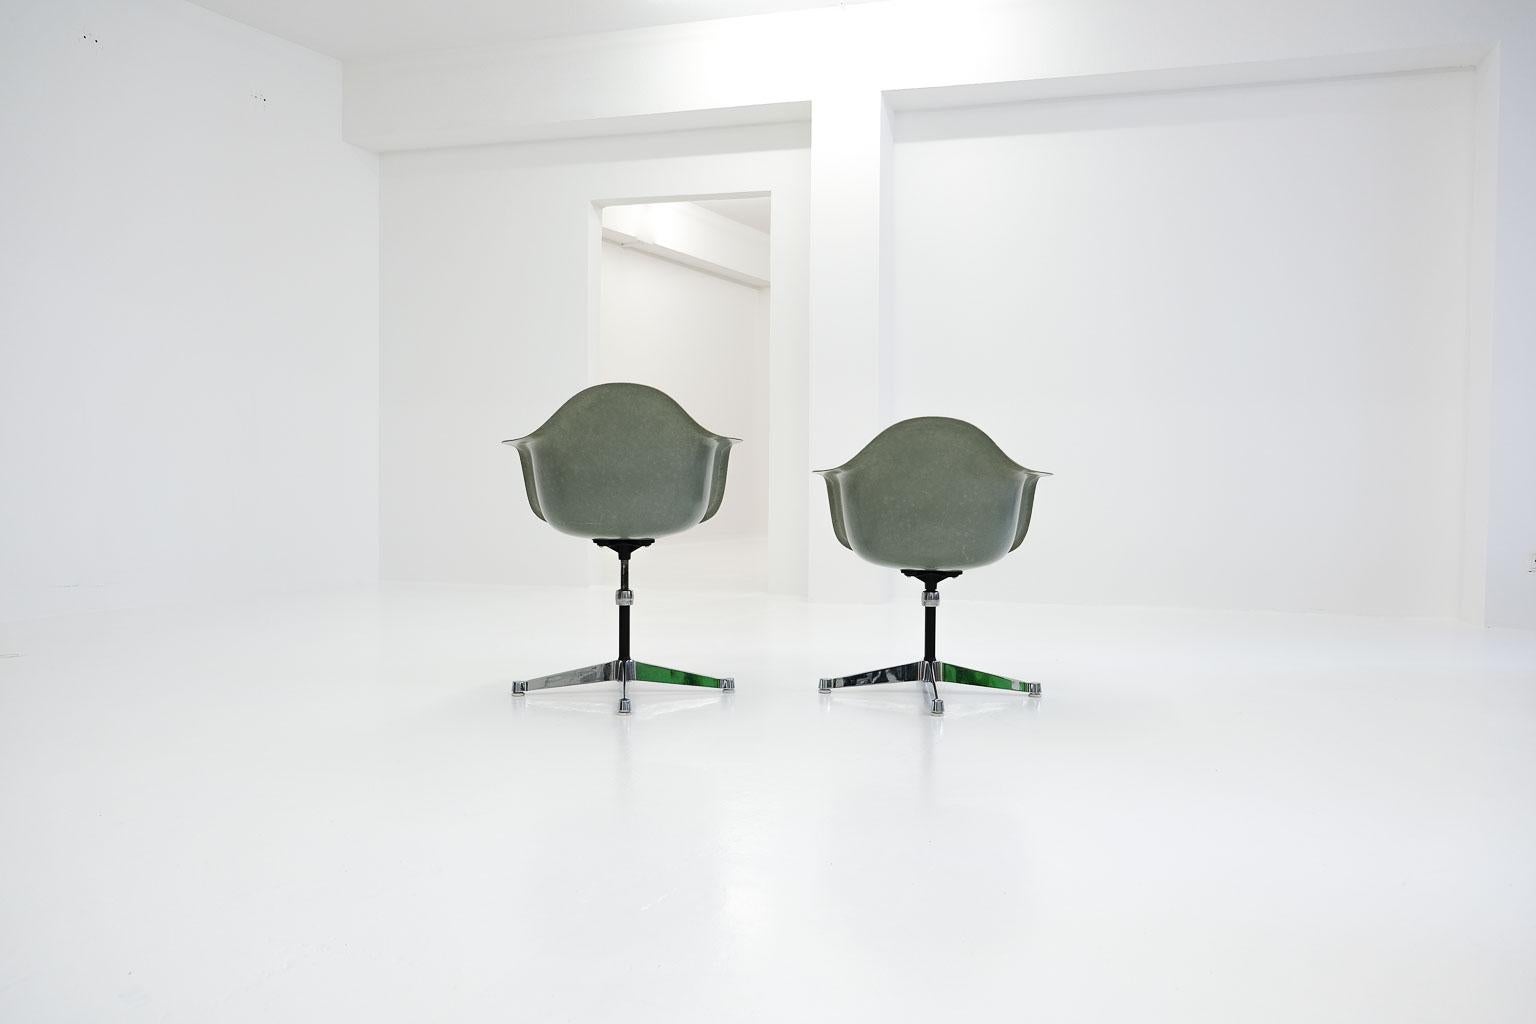 20th Century PAC (pivot armchair contract base - adjustable), Charles Eames for Herman Miller